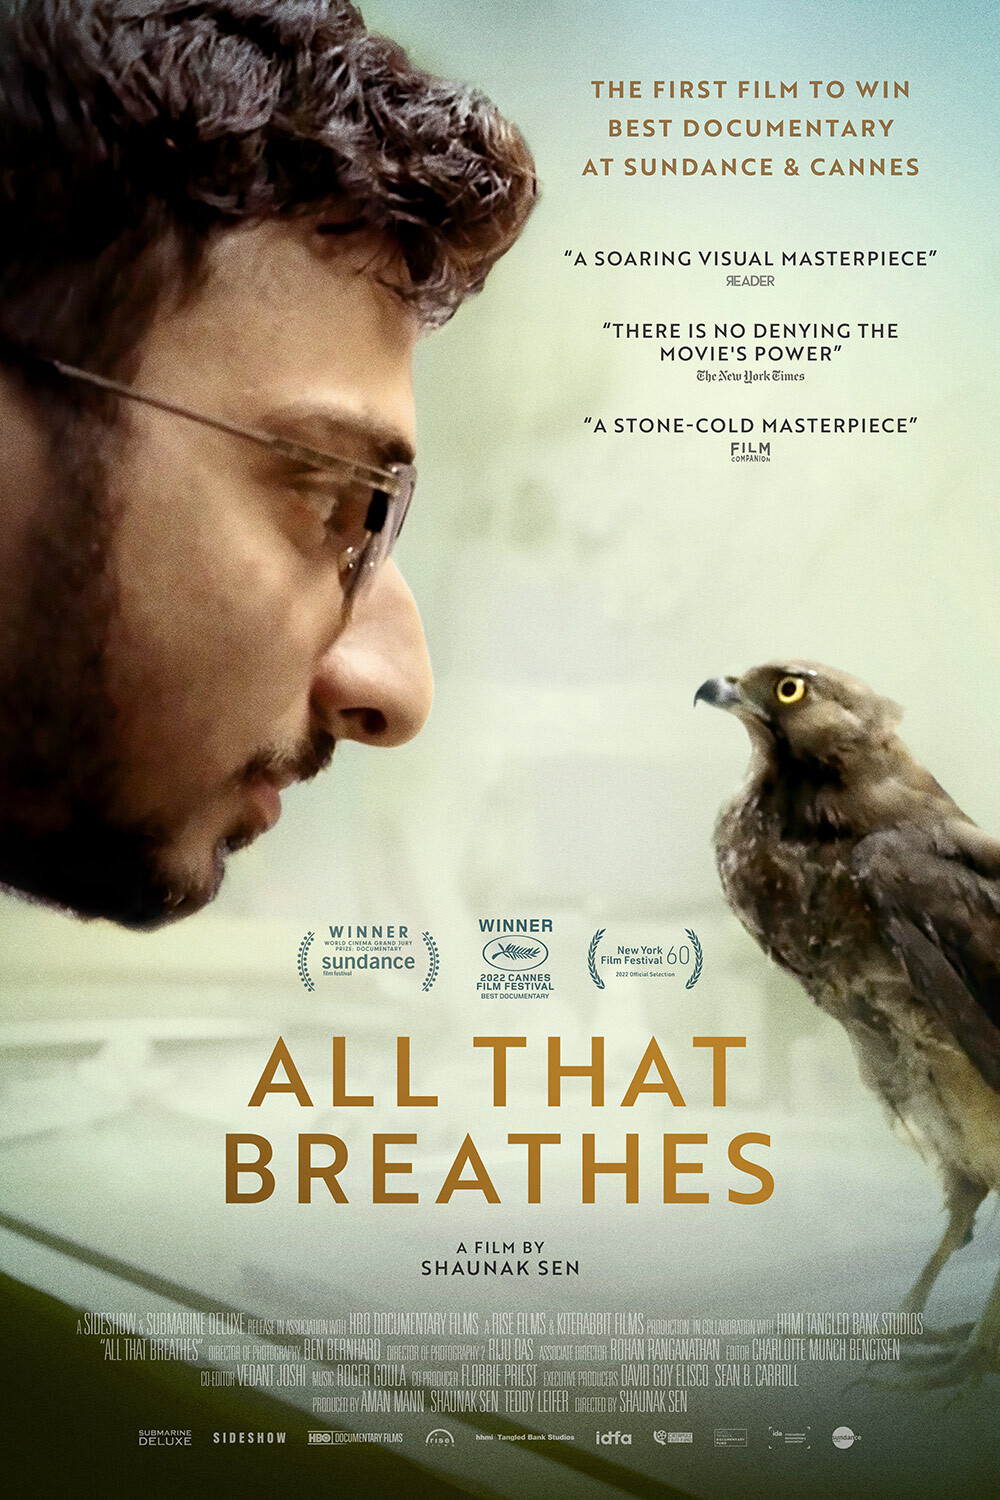 Movie poster for All That Breathes, man face to face with bird